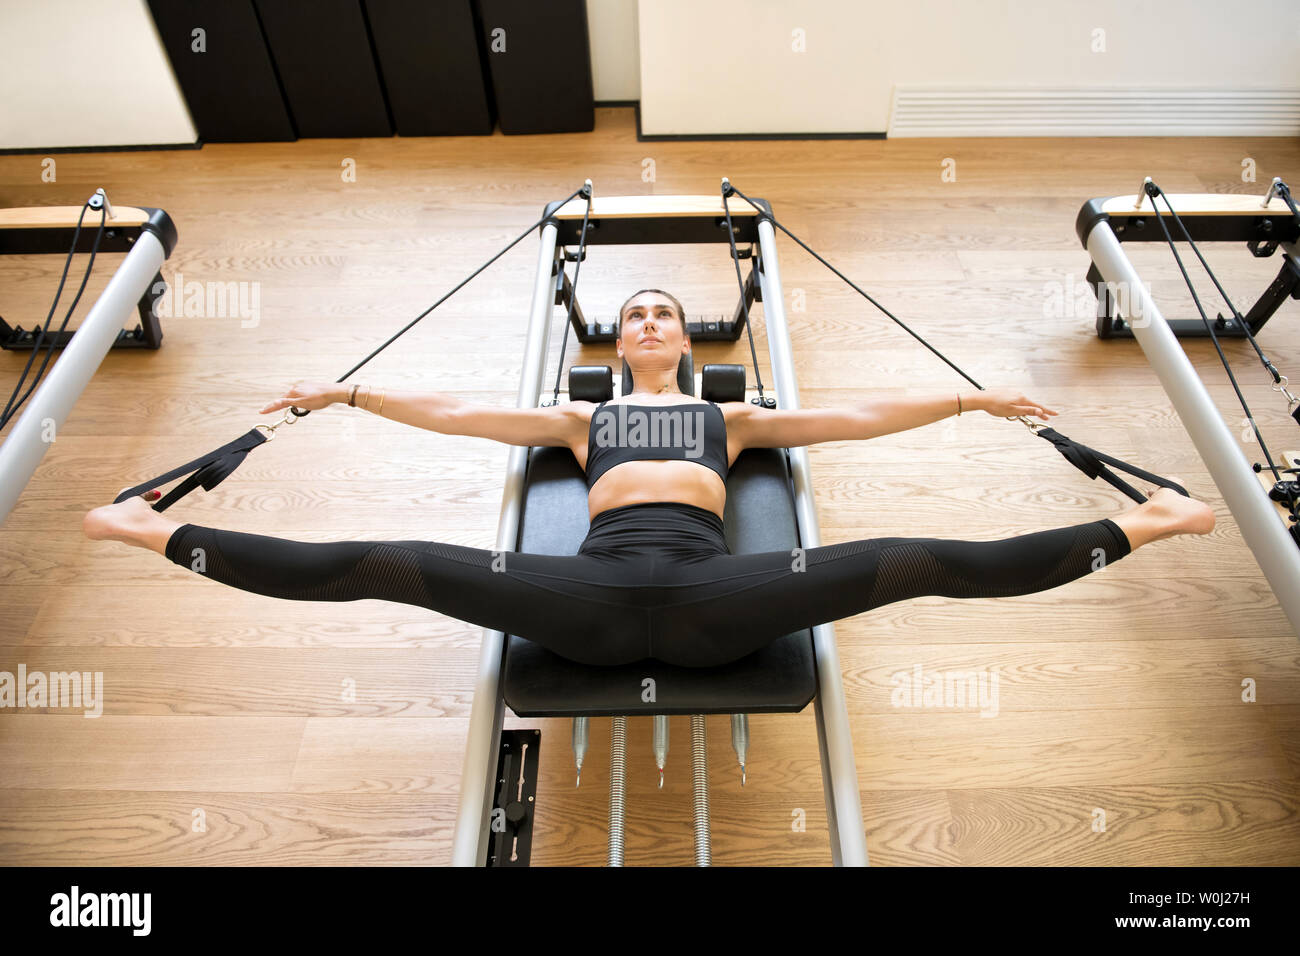 Overhead view on female adult in black outfit using pilates reformer  machine to stretch legs Stock Photo - Alamy